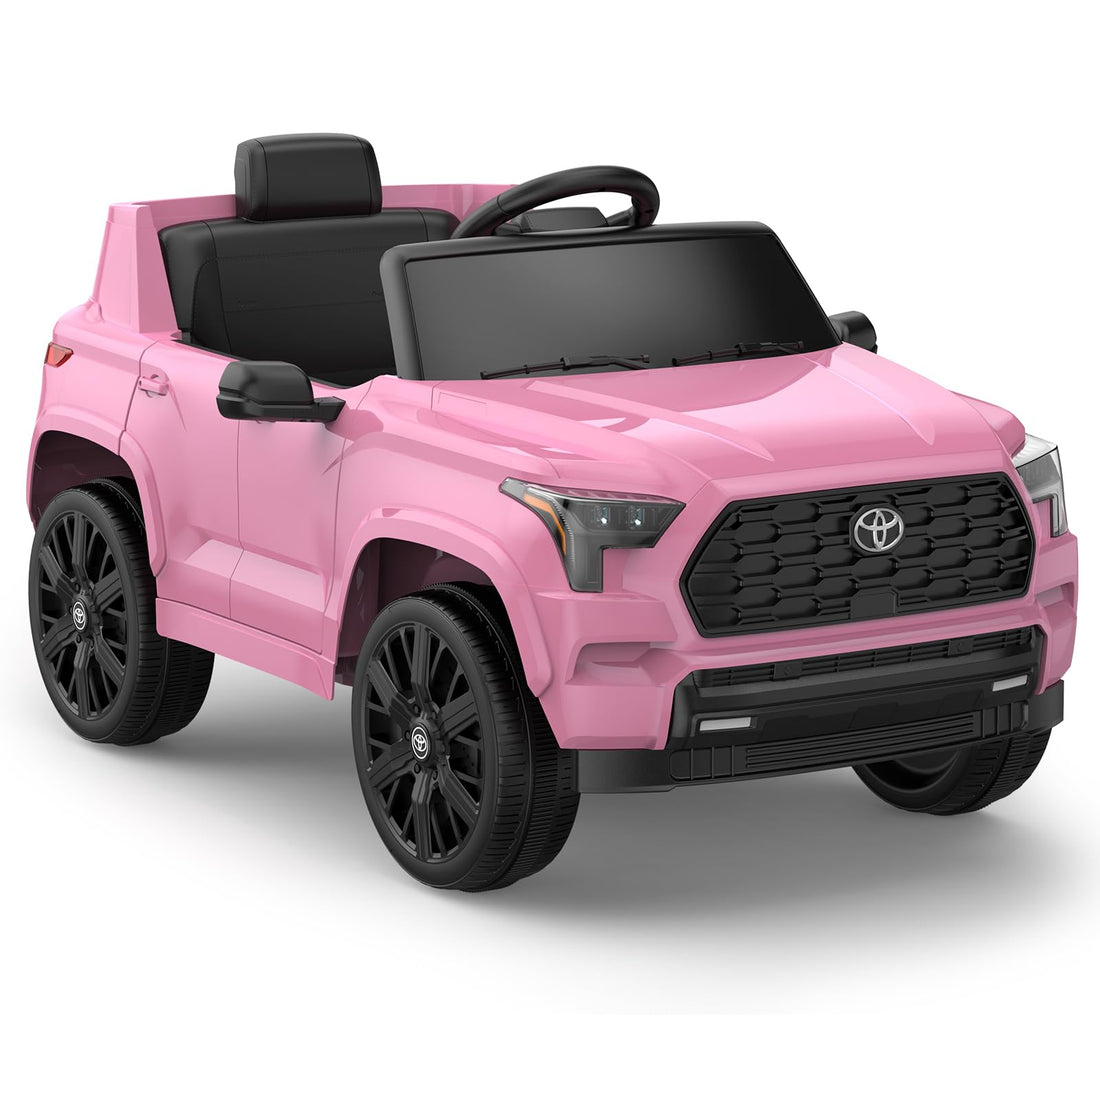 Ride on Truck Car, 12V Licensed Toyota Electric Cars for Kids, Ride on Toys with Remote Control, Spring Suspension, LED Lights, Bluetooth, 3 Speeds